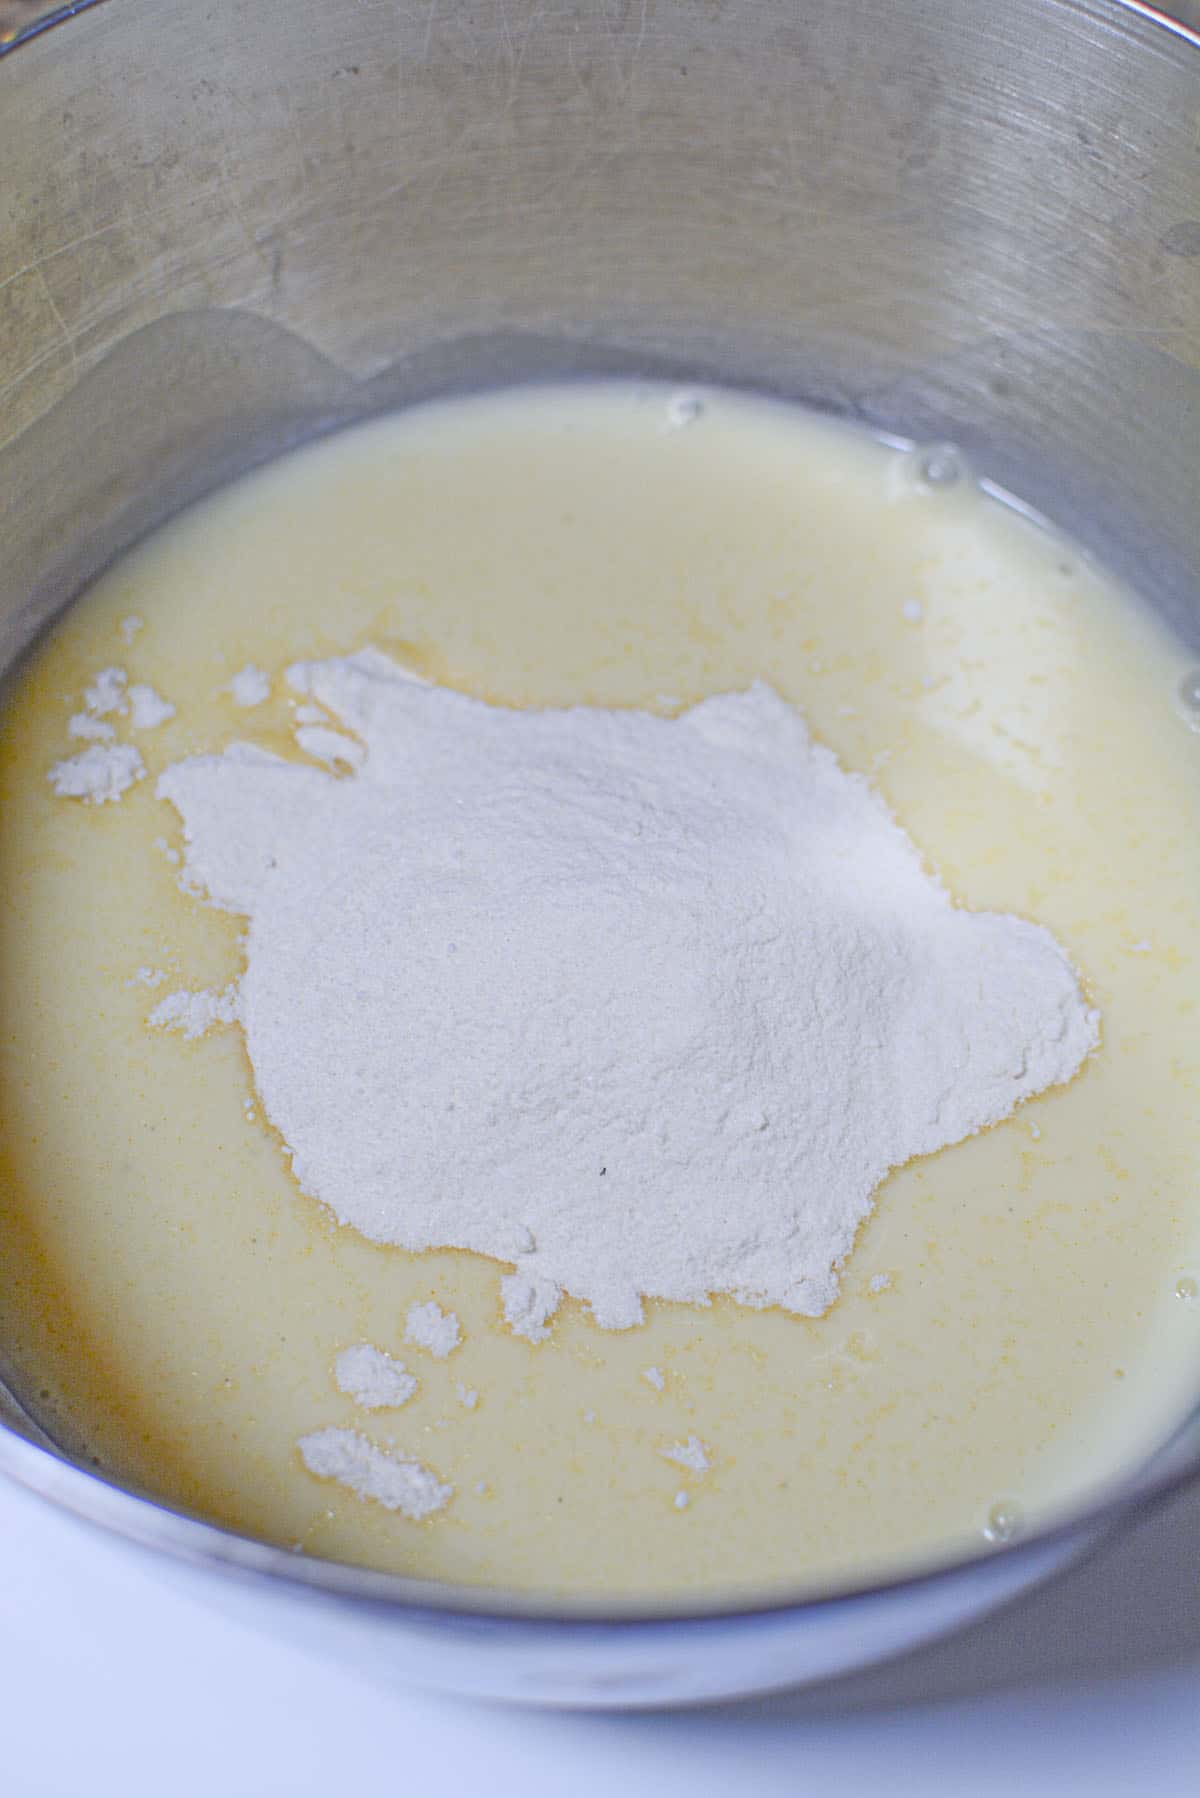 The Instant Pudding is added to the cold eggnog.